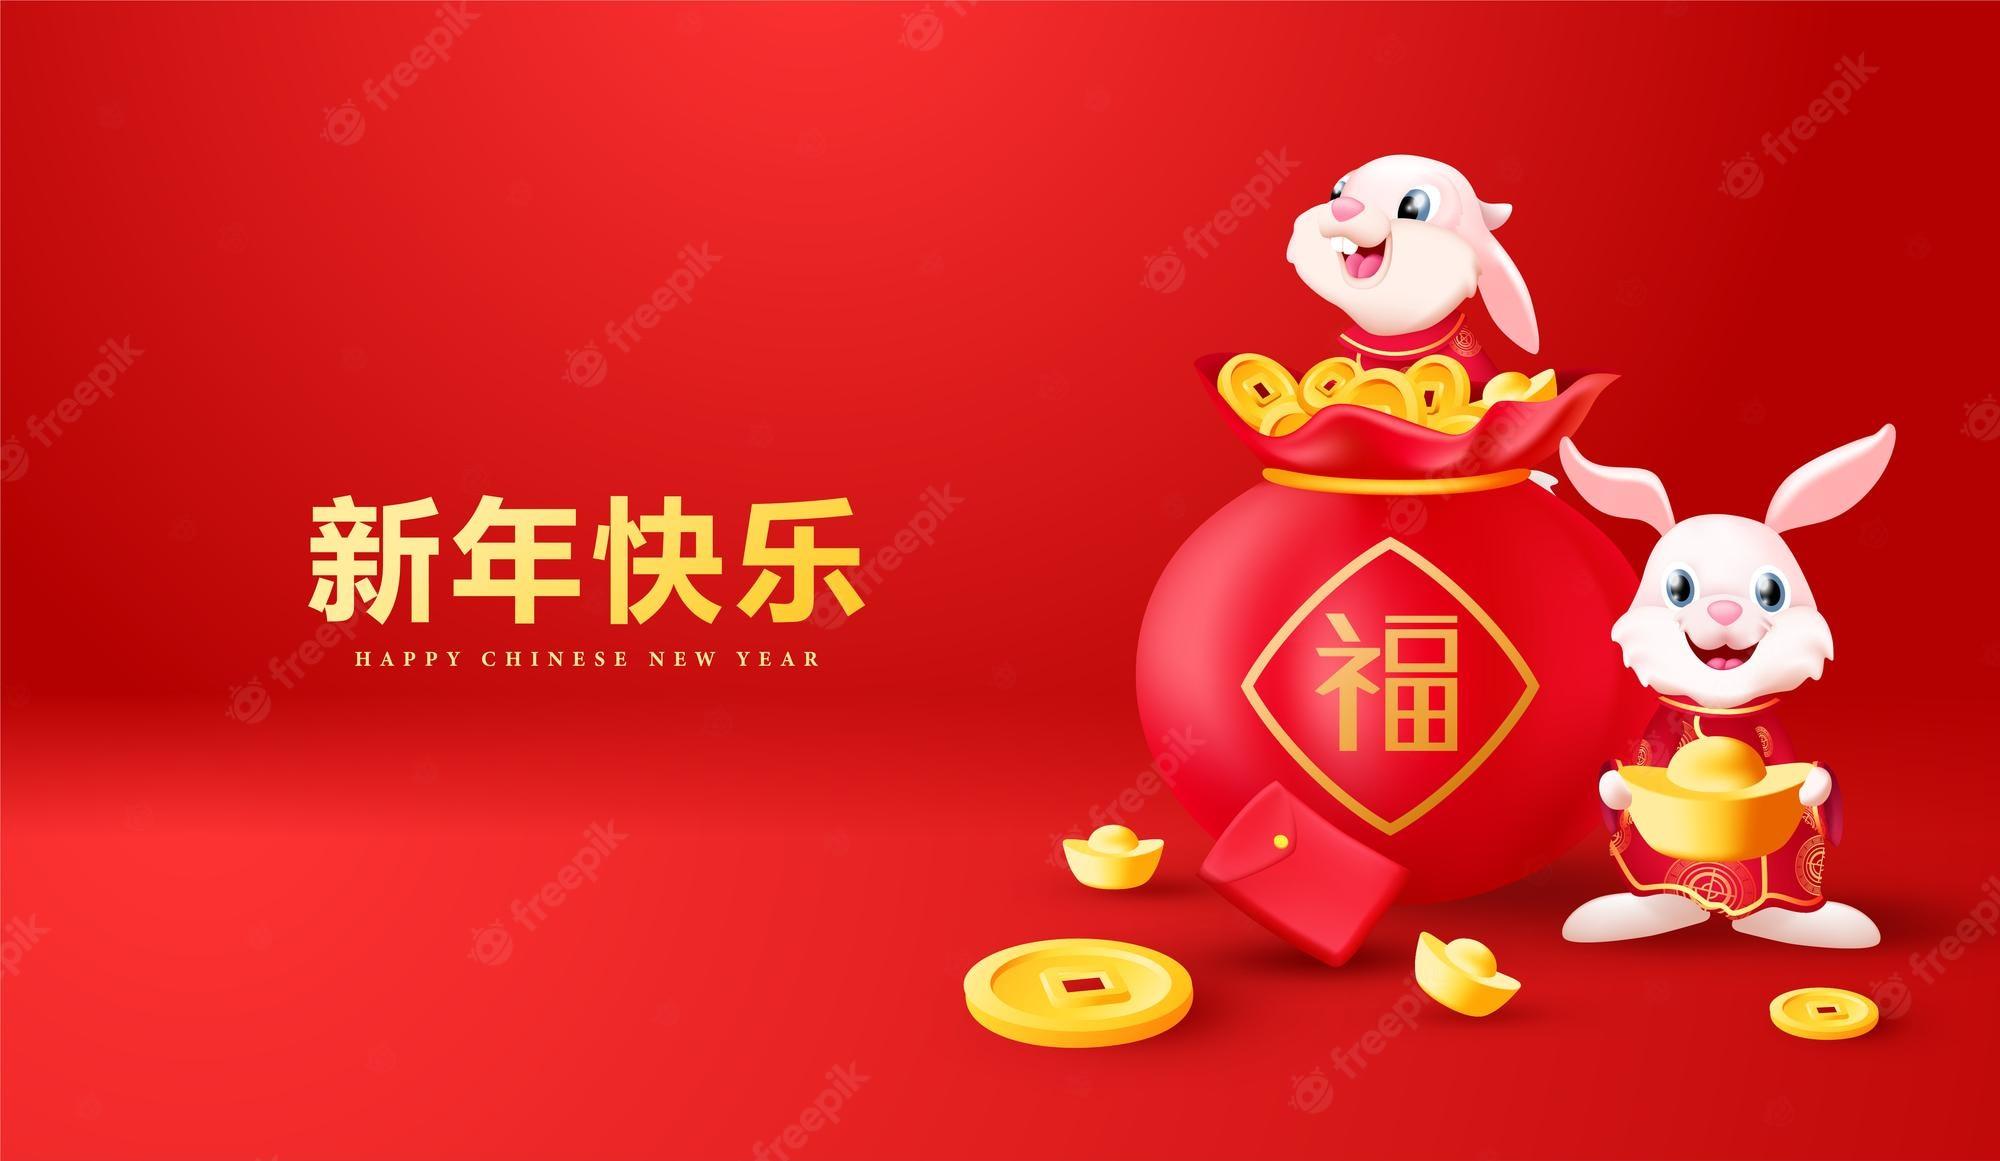 Happy Lunar New Year 2023 Greetings To Celebrate Spring Festival    LatestLY